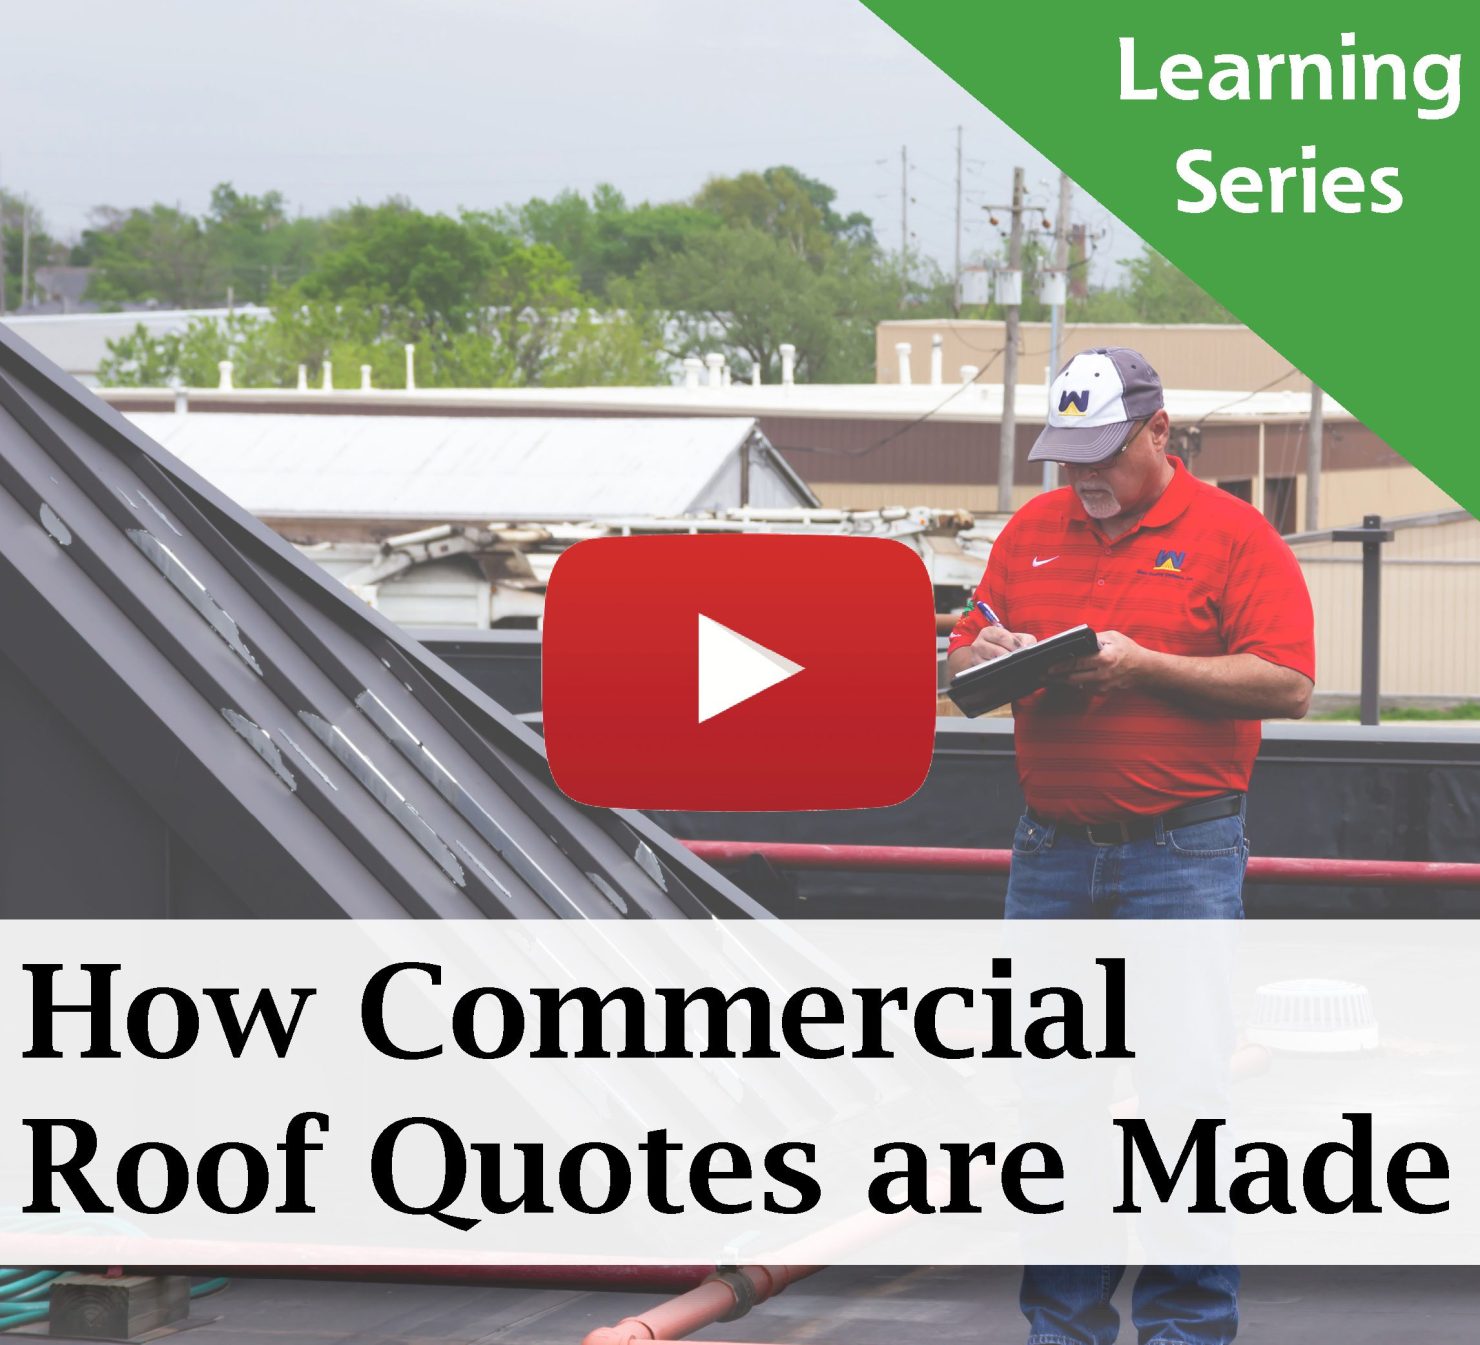 HOW COMMERCIAL ROOF QUOTES ARE MADE